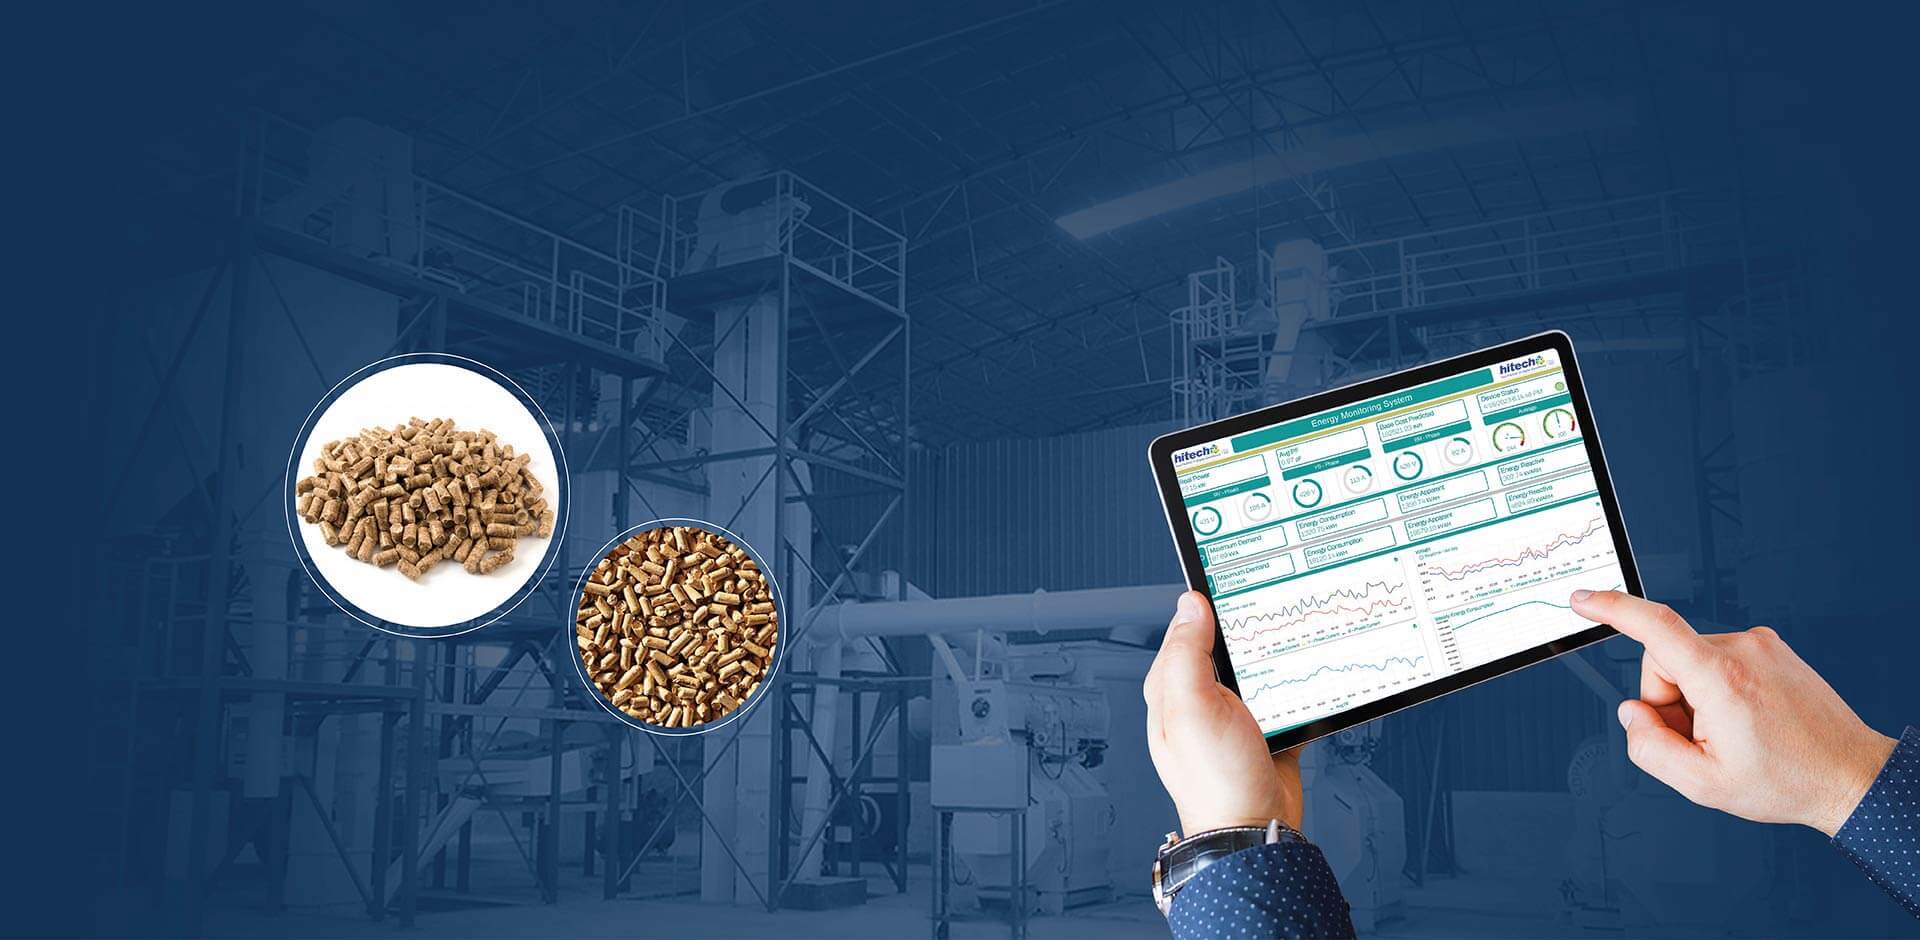 Smart production process KPI monitoring system enhances efficiency and accuracy through real-time visibility and elimination of data silos for Asian wood manufacturer Banner